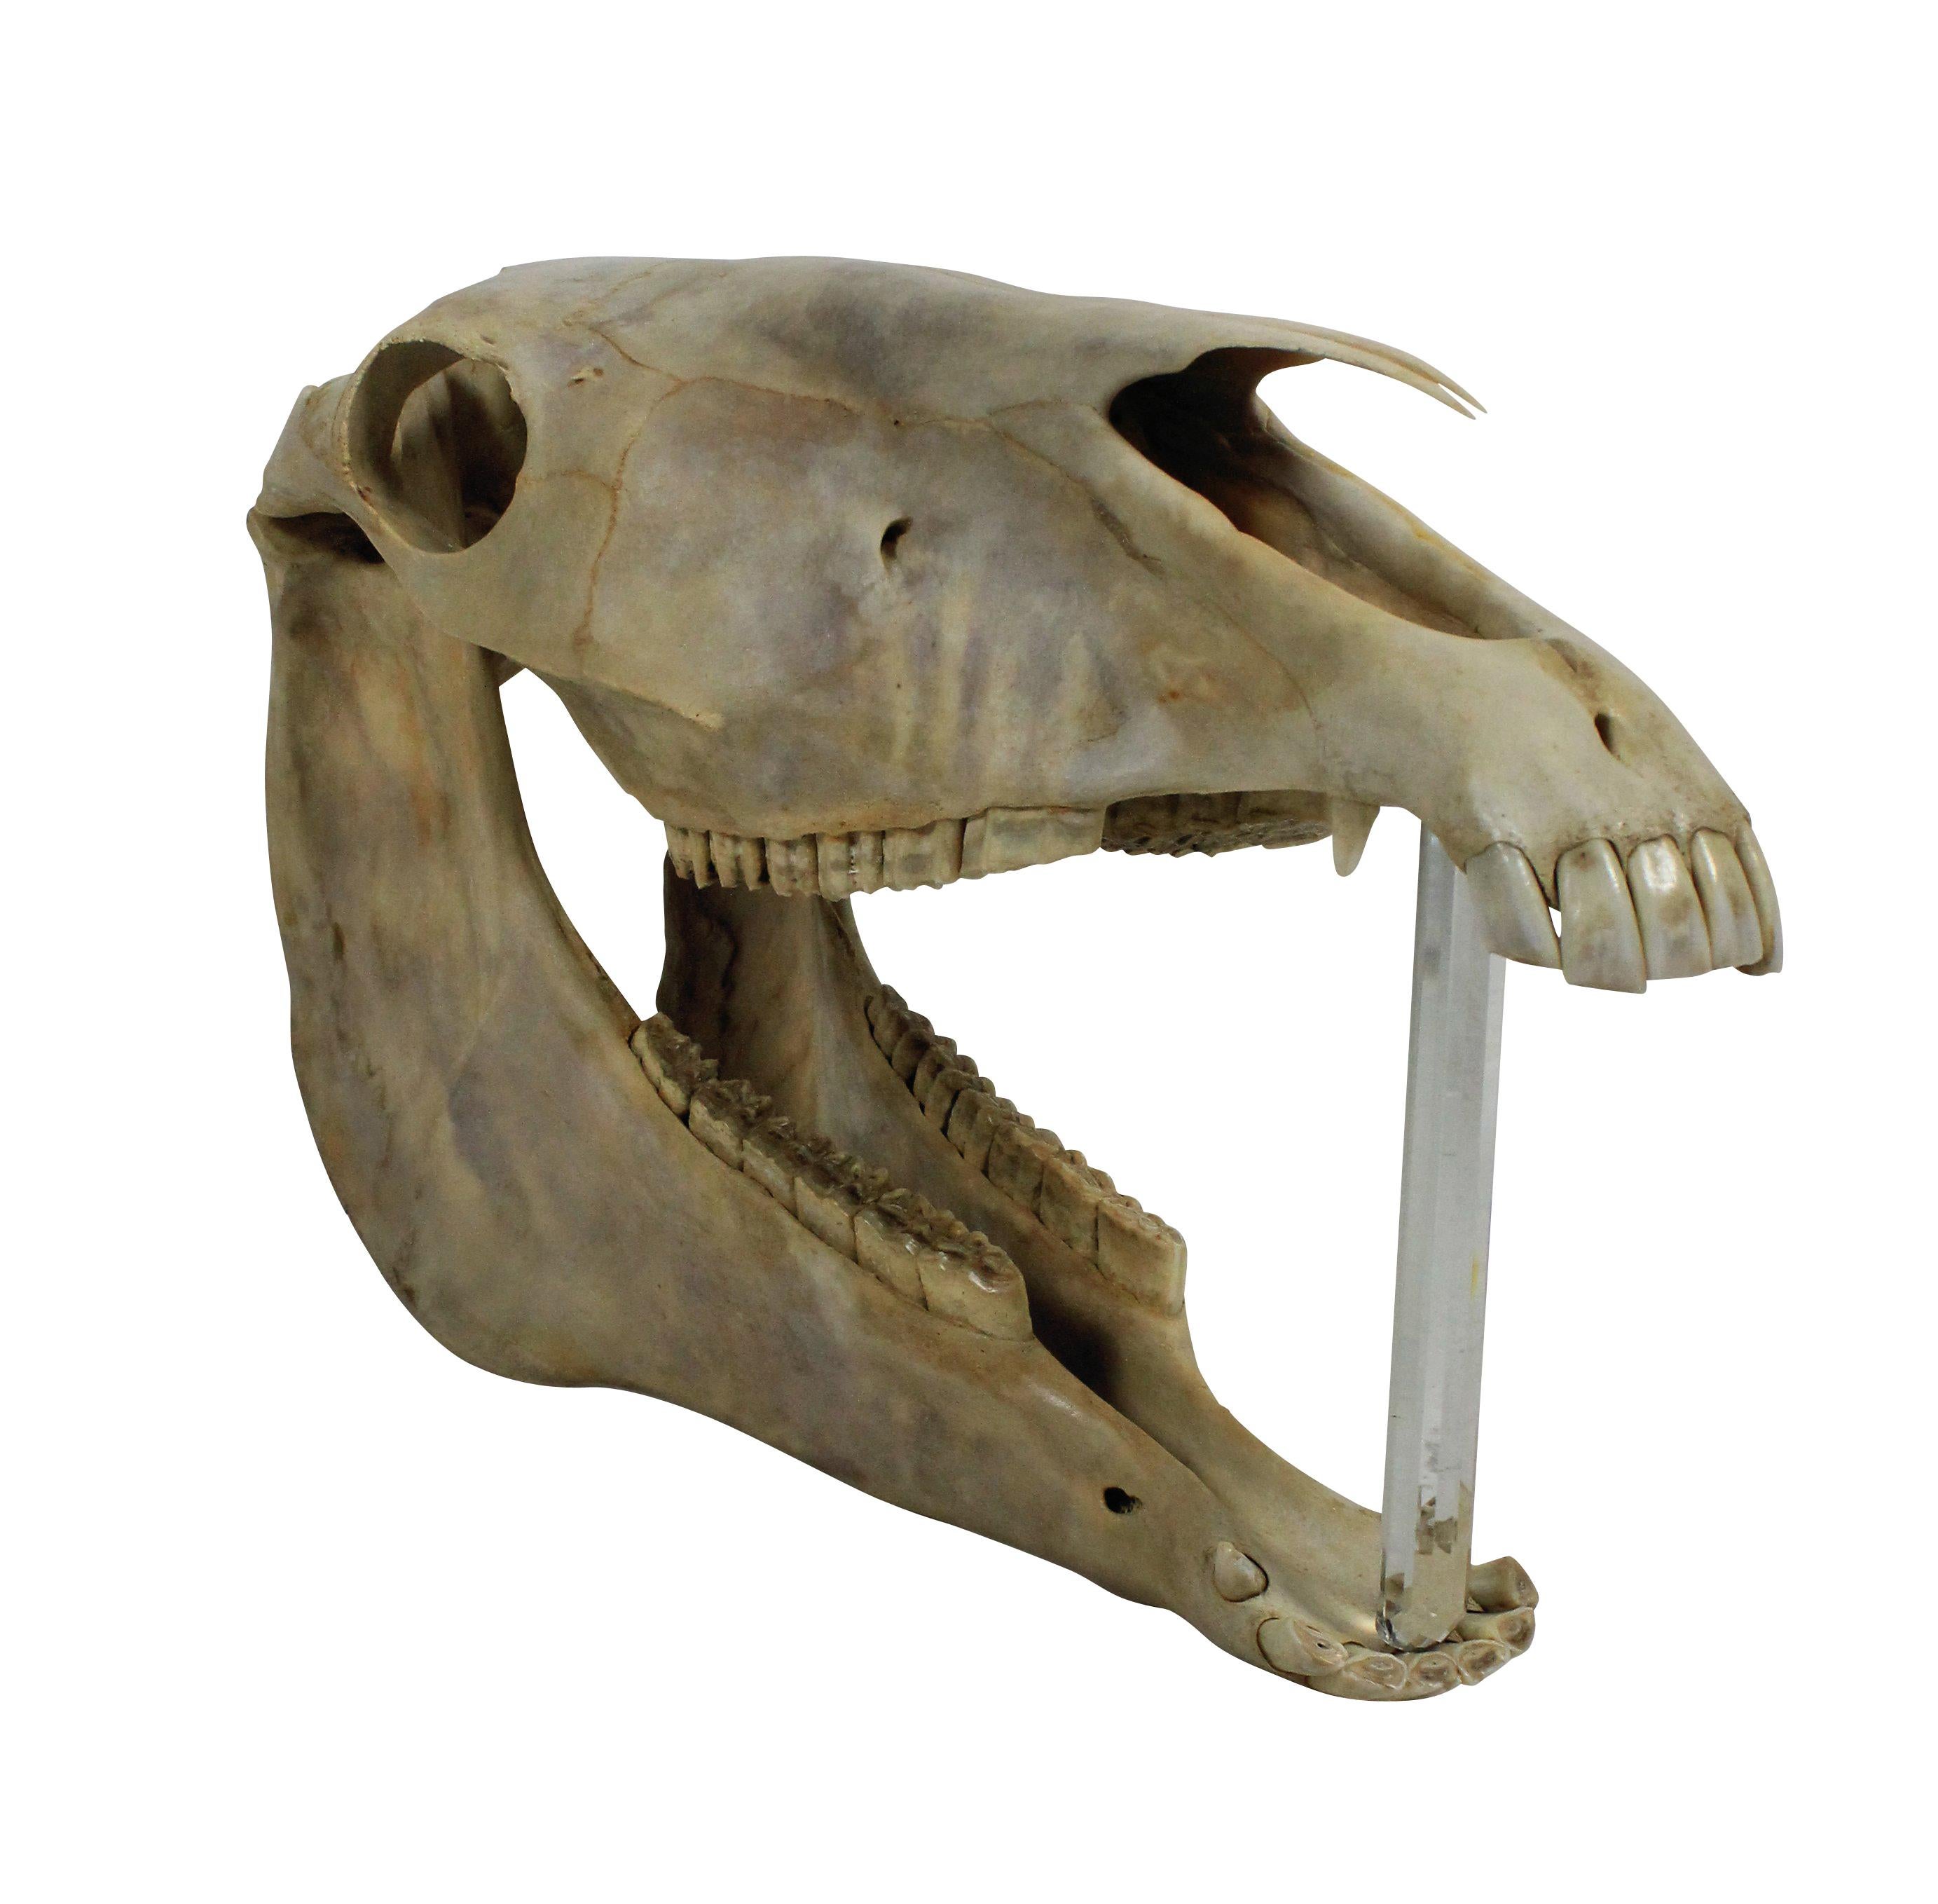 A large adult horses skull, which is freestanding. The mouth can be propped open and a light placed inside.